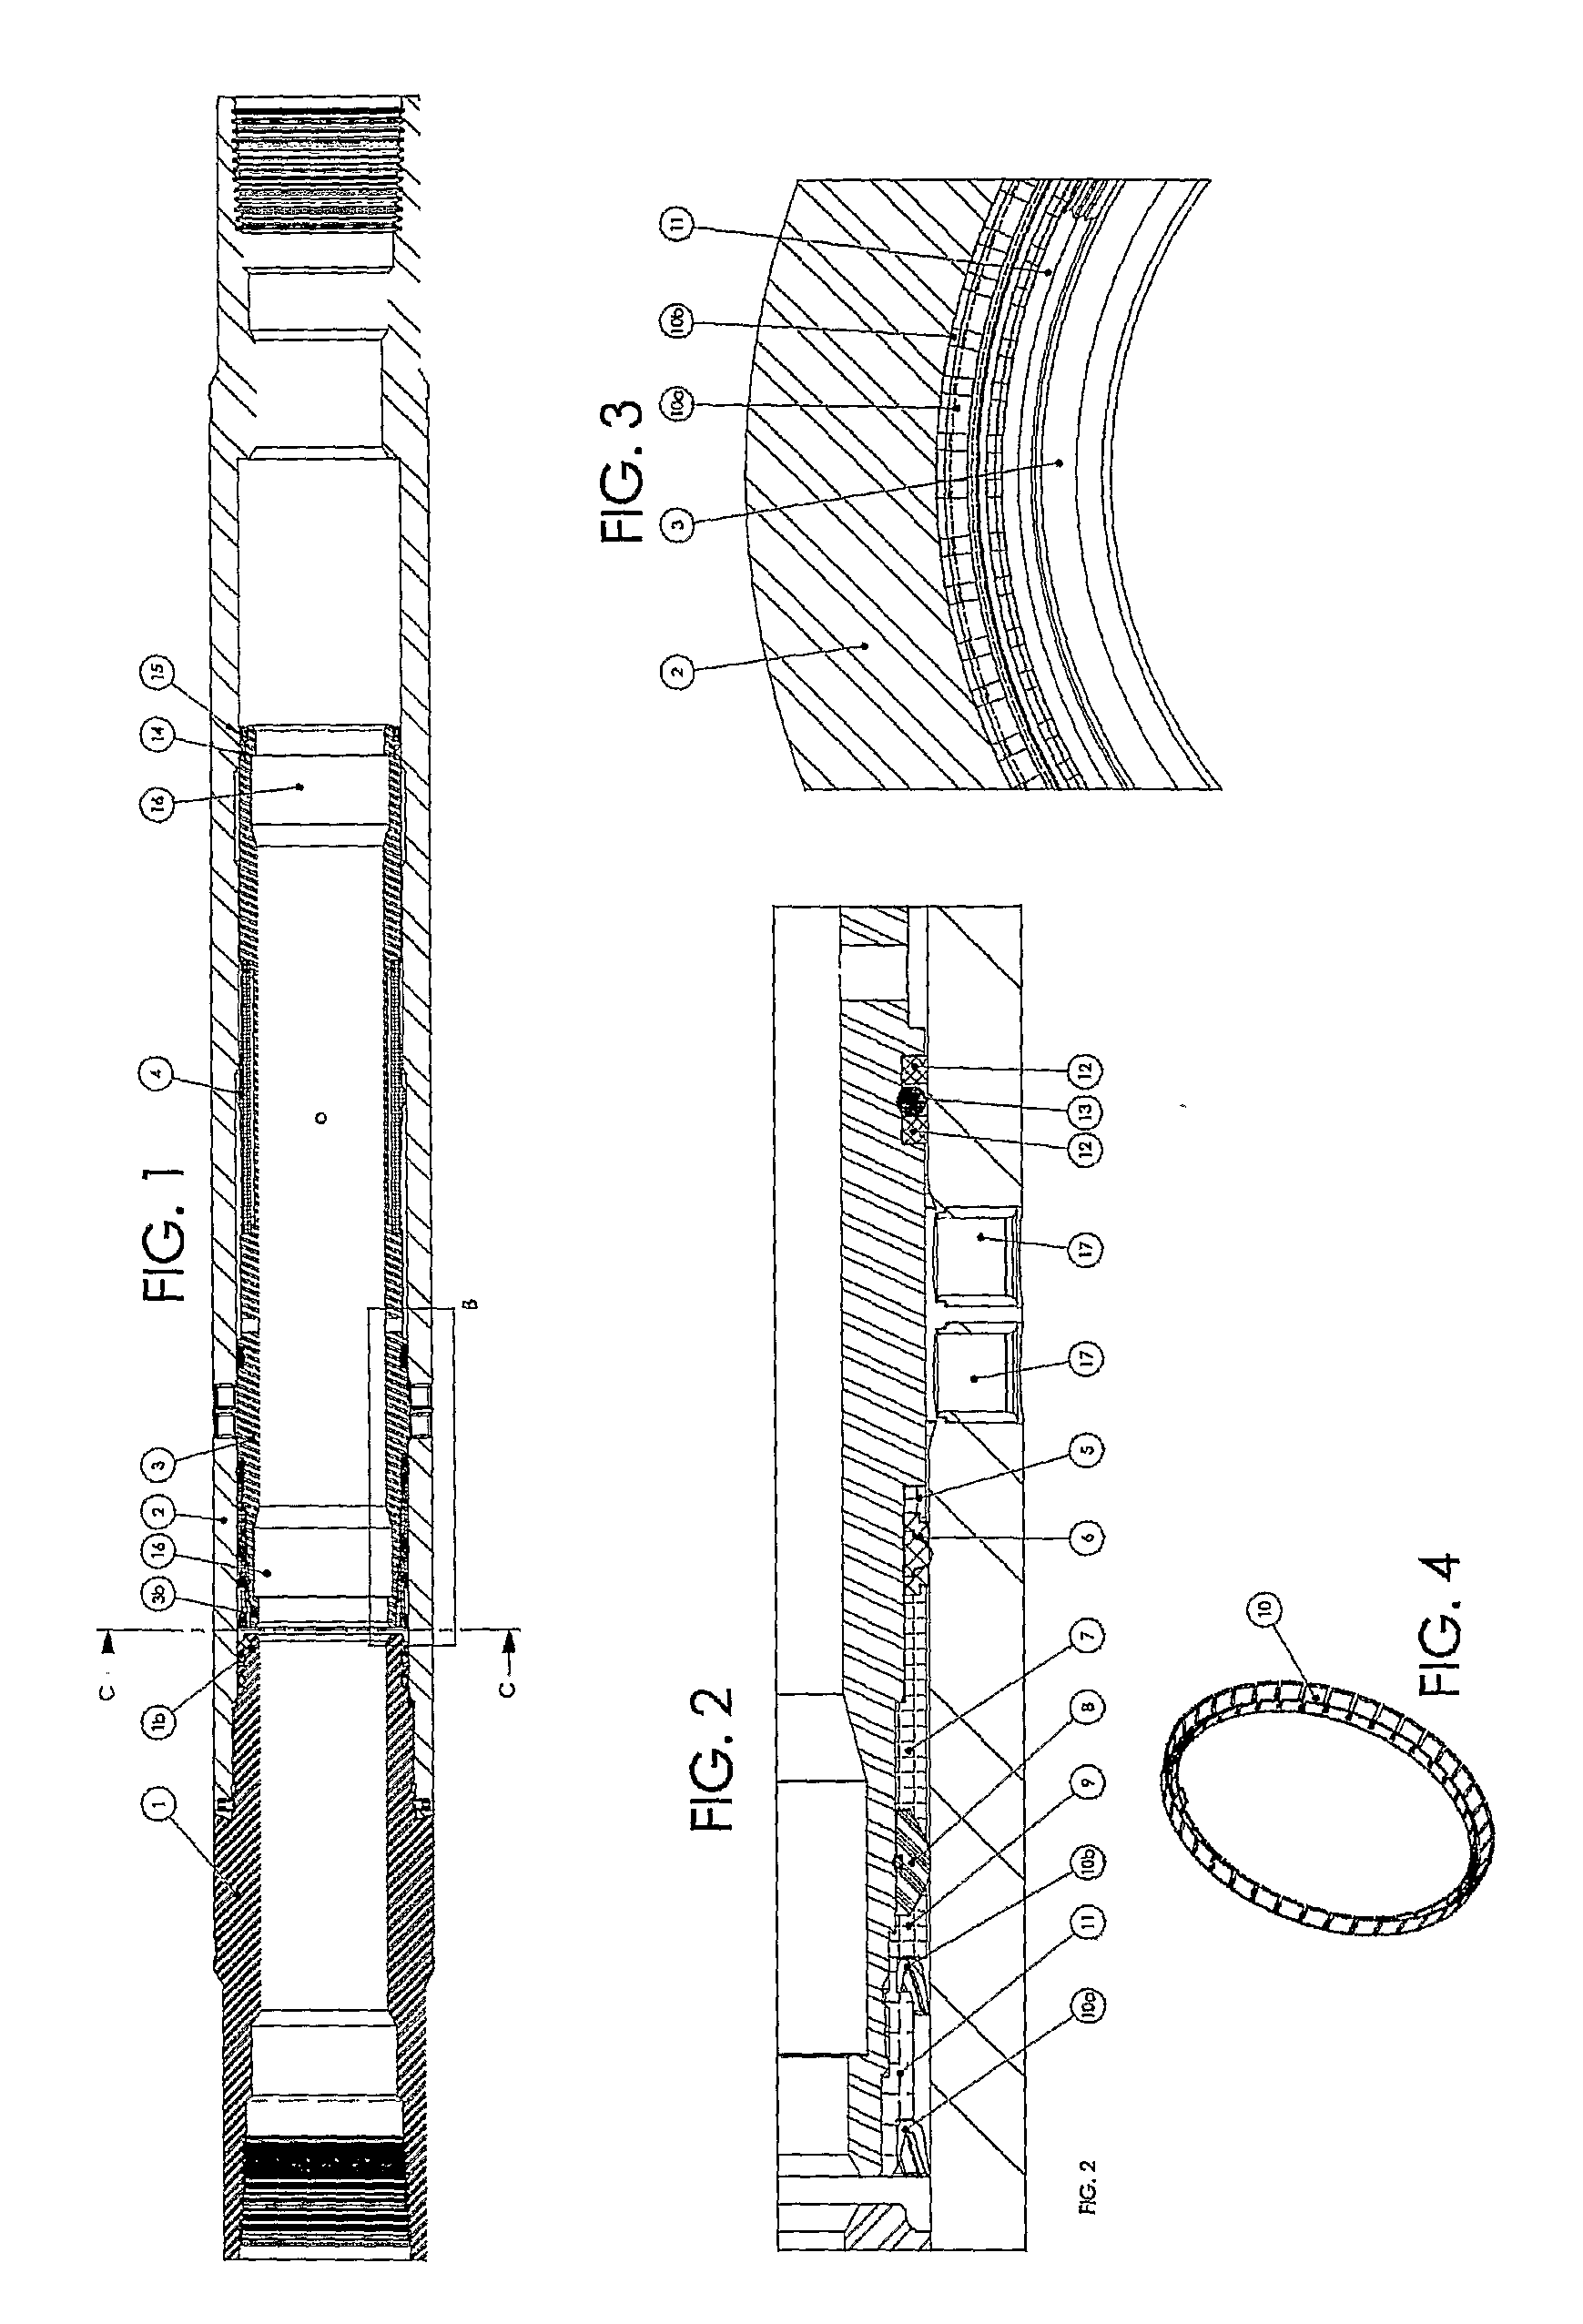 Valve for Wellbore Applications